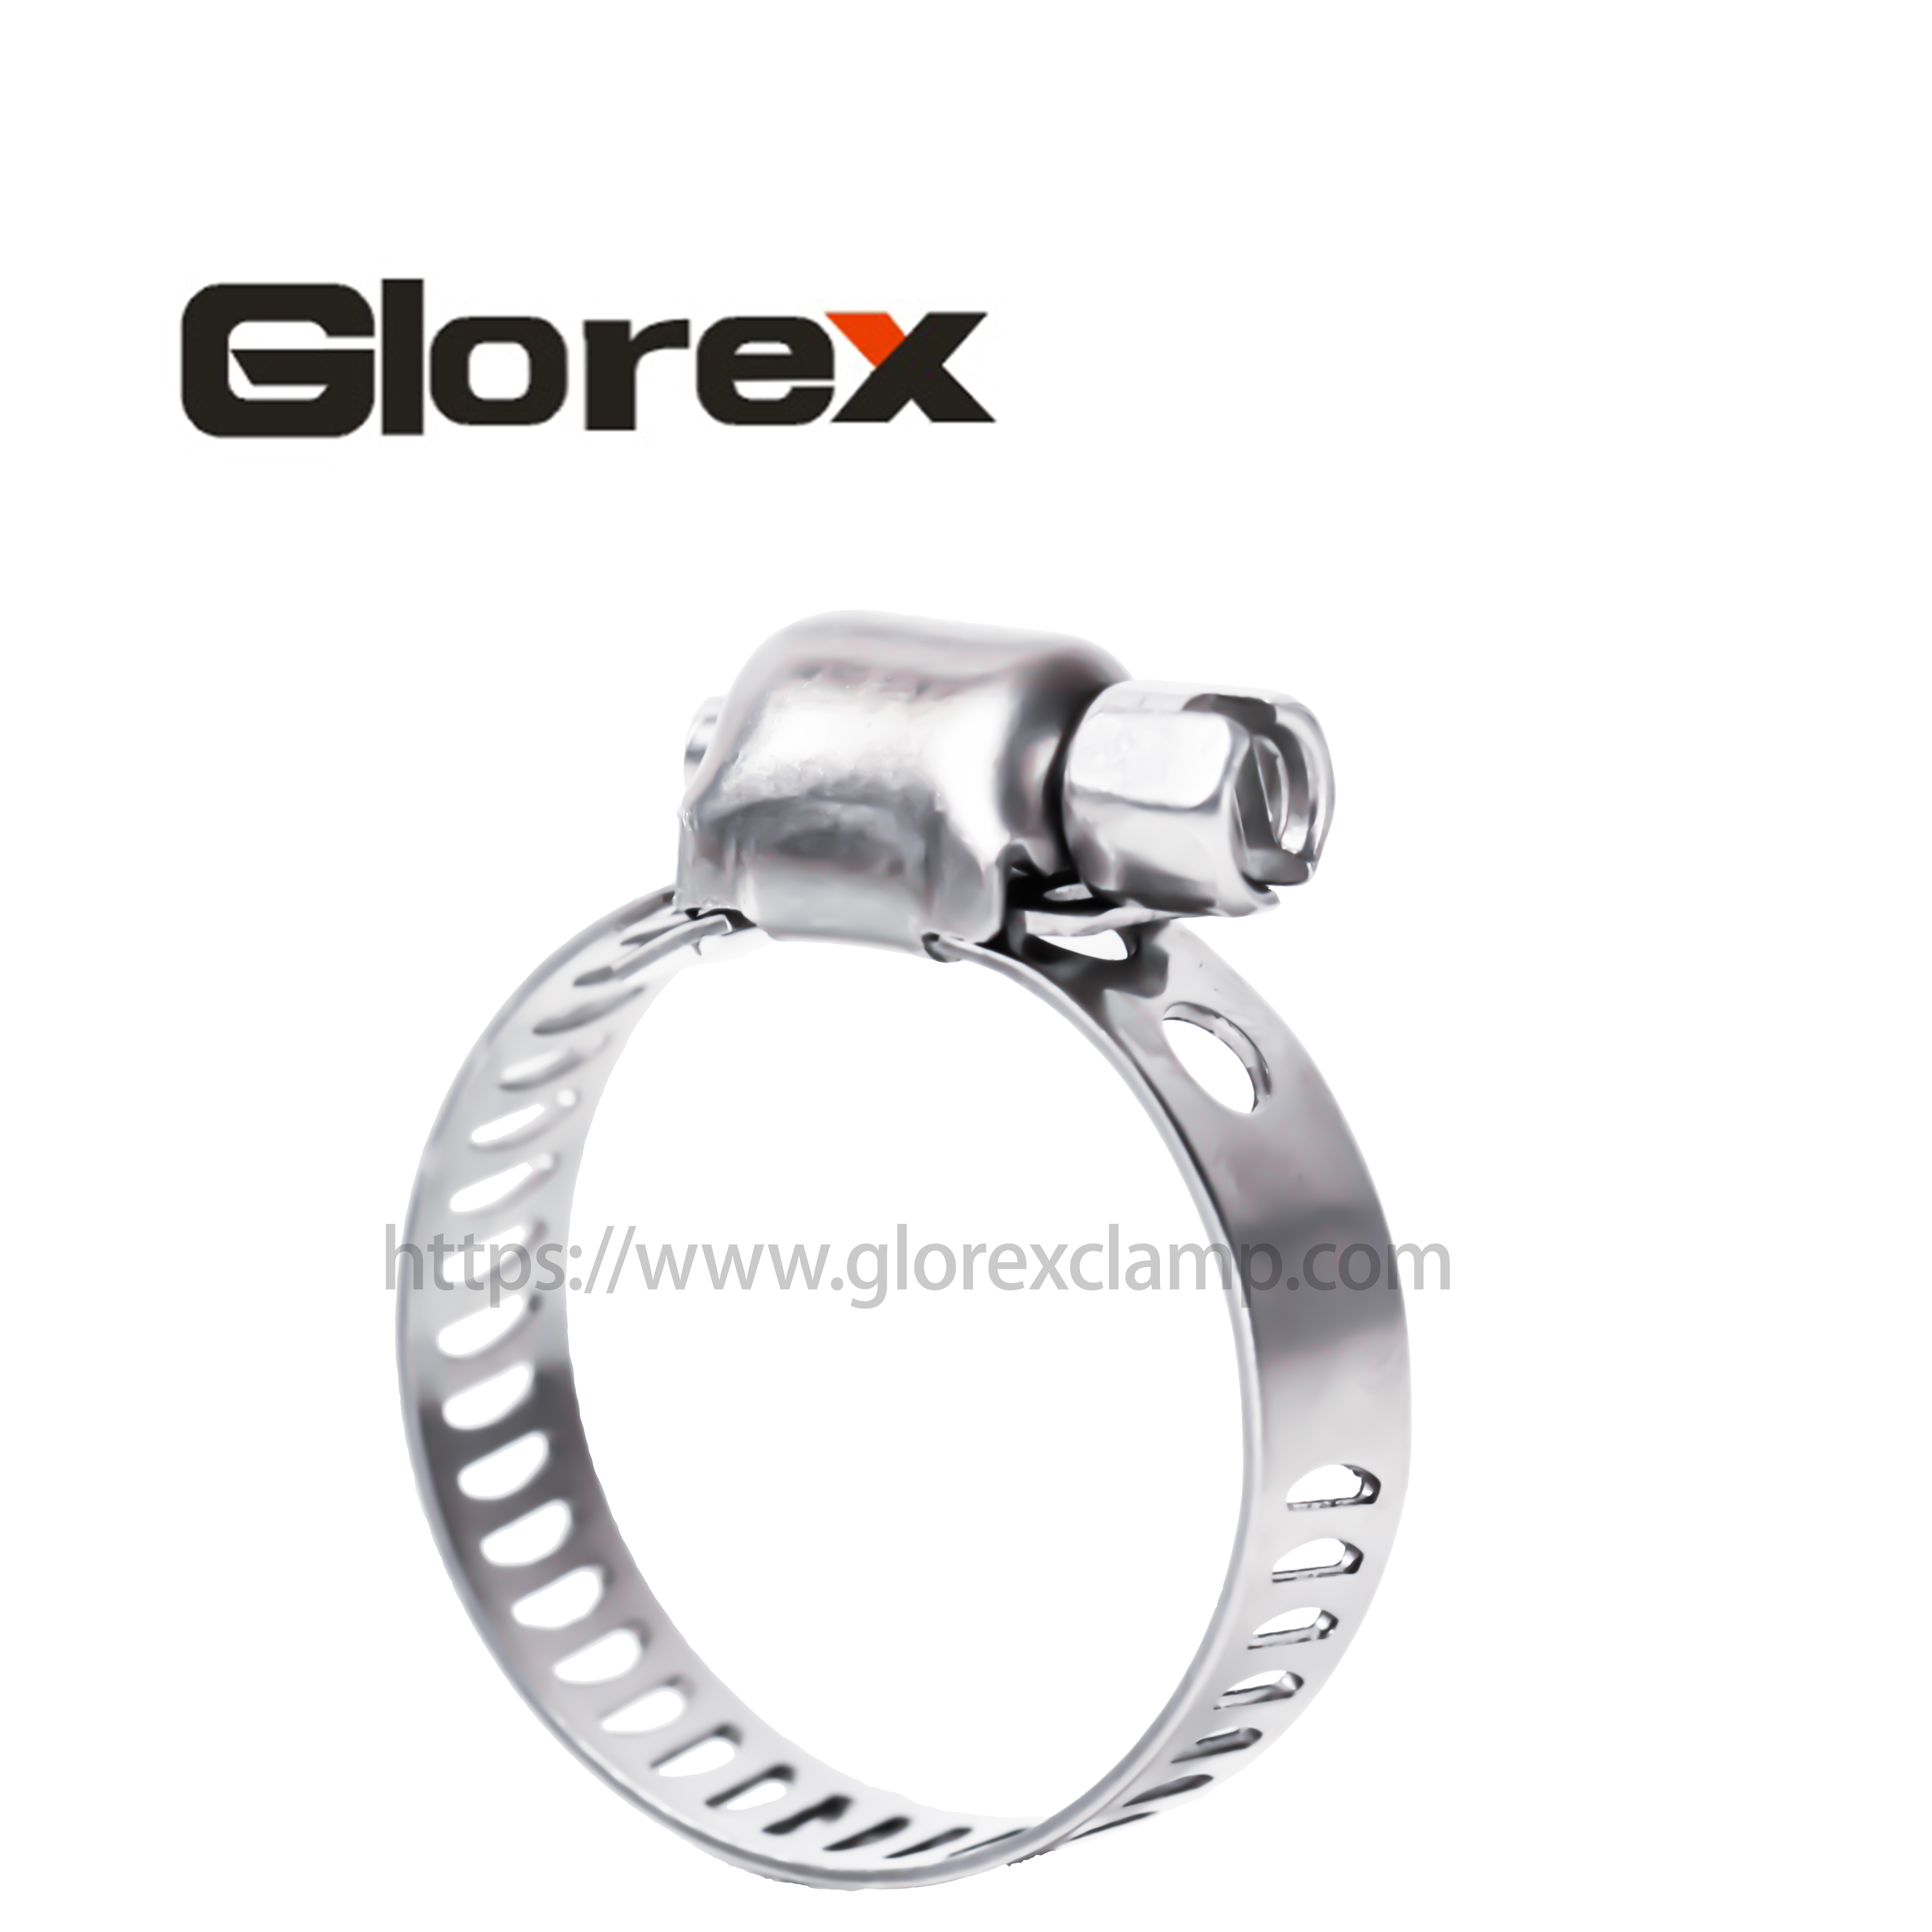 8mm American type hose clamp Featured Image